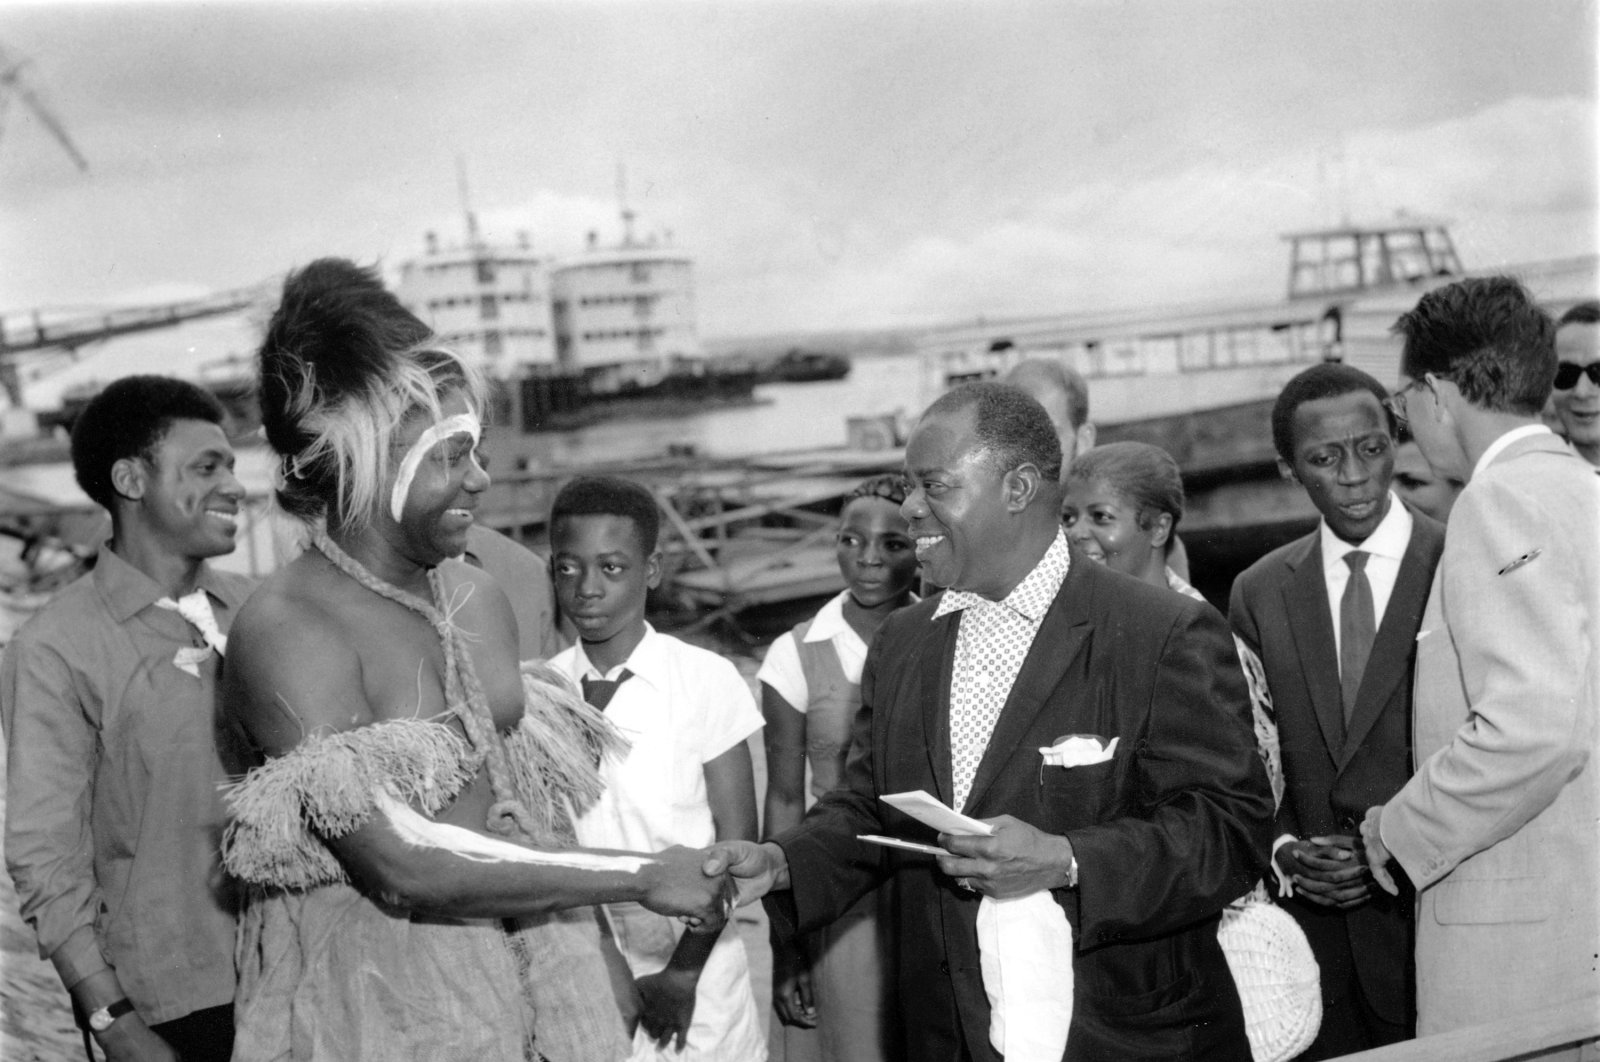 American jazz musician Louis Armstrong is greeted by Bolela, the Akuku tribal chief in costume, on the beach on his arrival in Leopoldville, Congo, Oct. 28, 1960. (AP Photo)